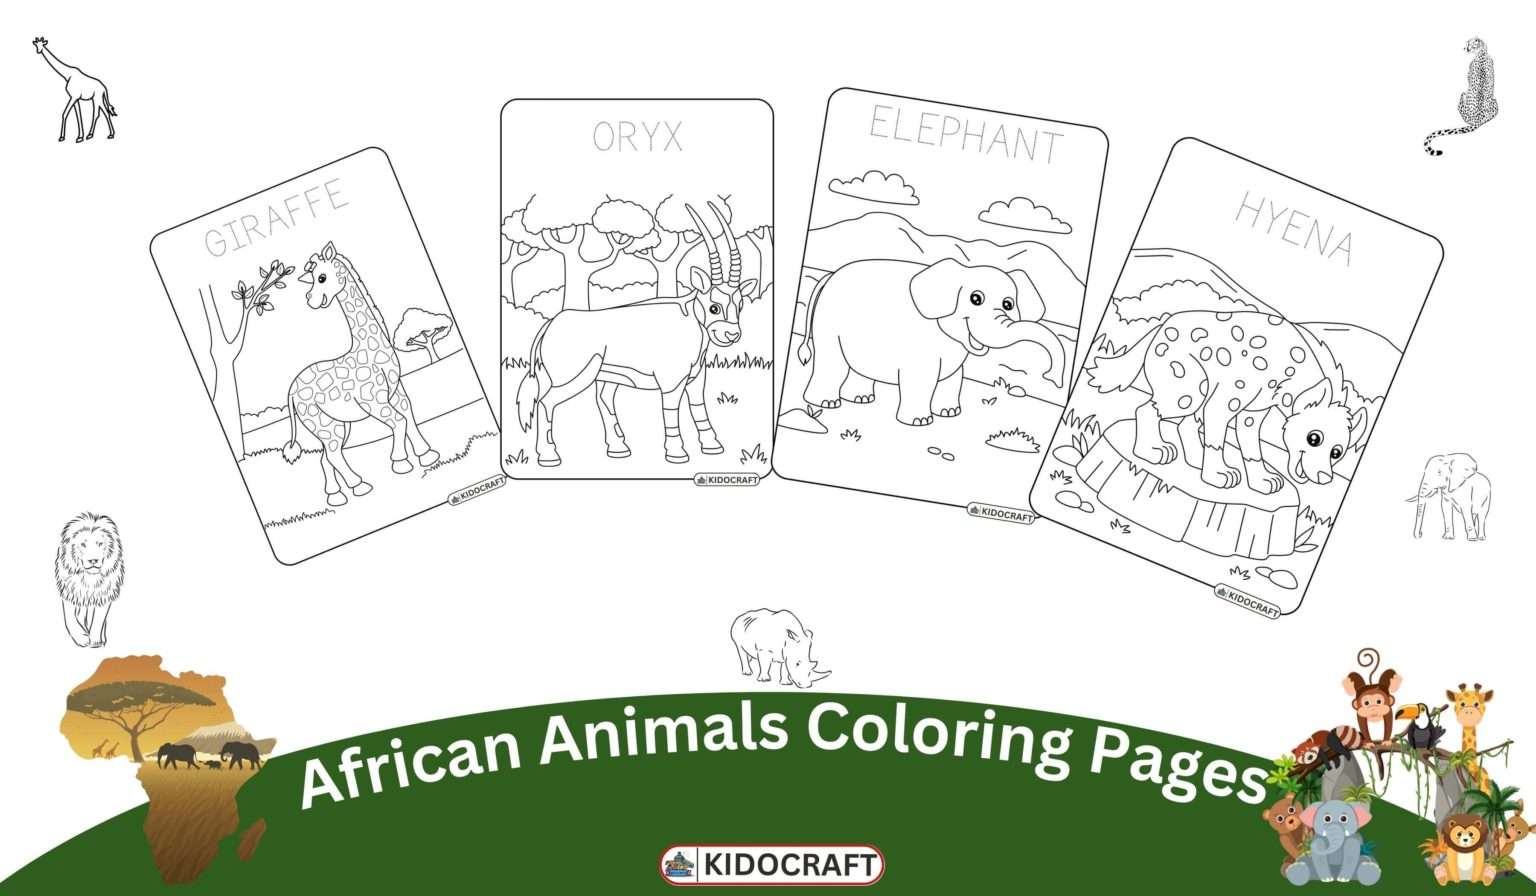 African Animals Coloring Pages | Free Printable - Kido Craft